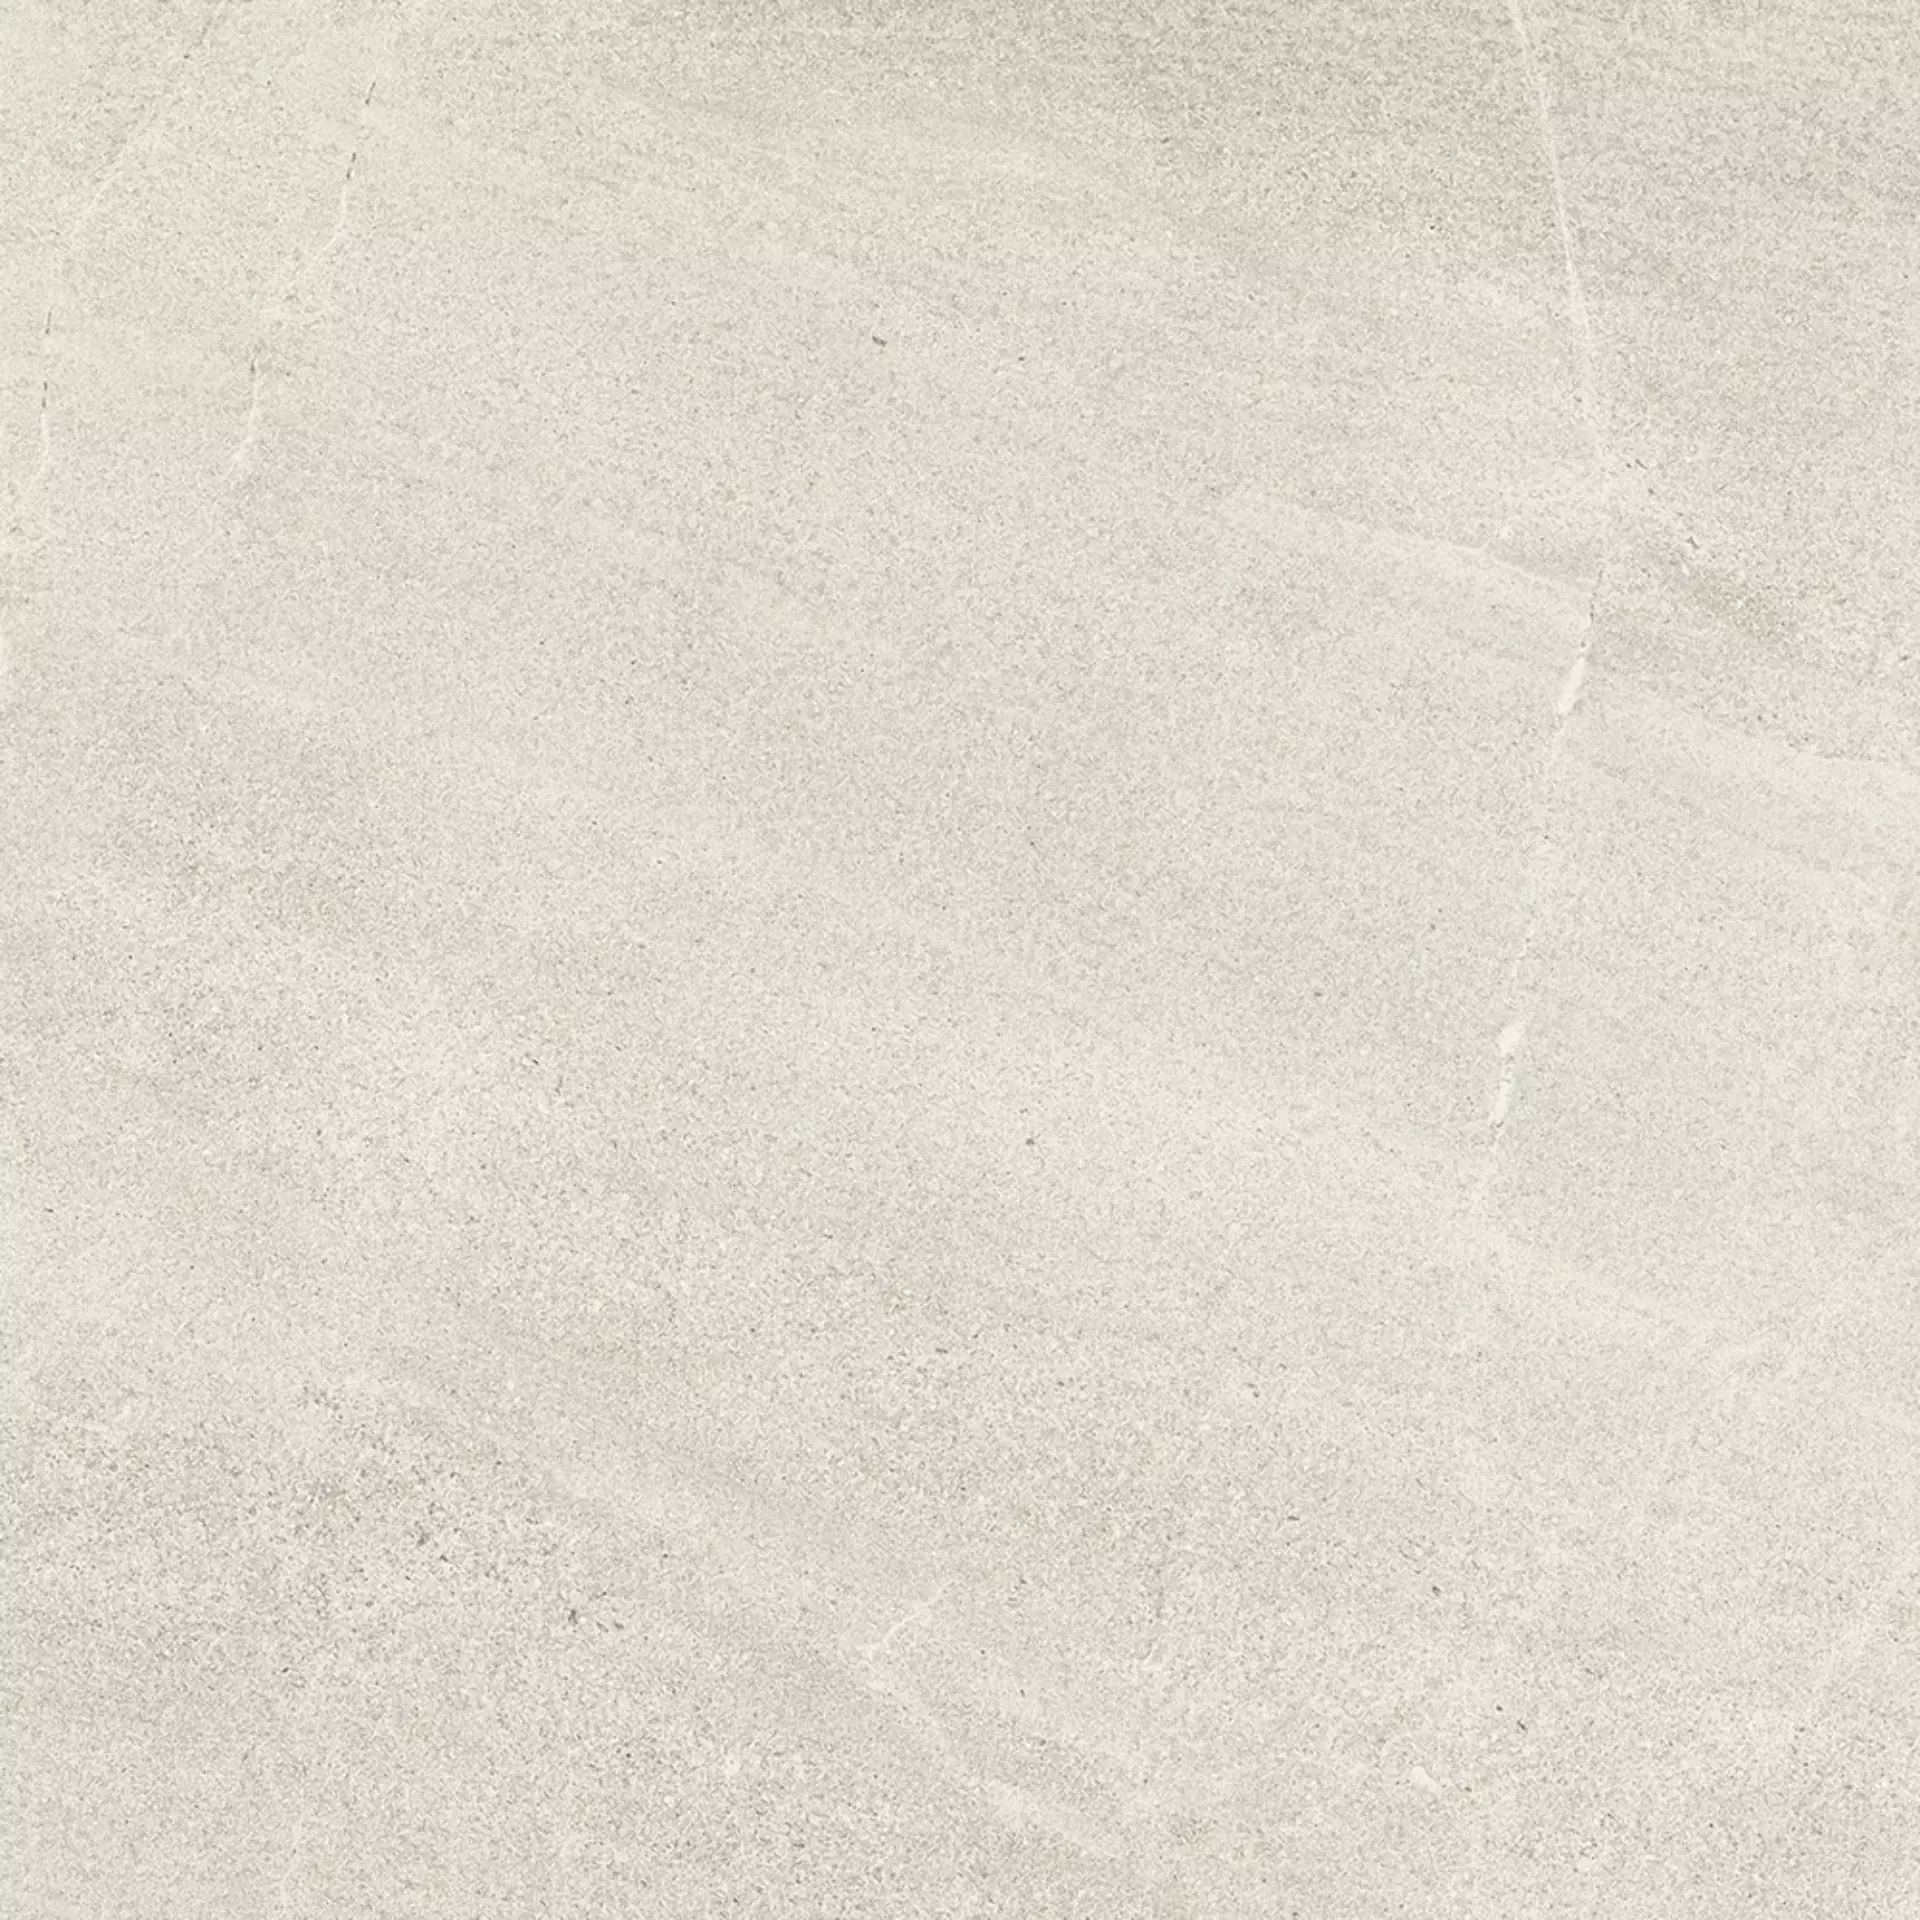 Cottodeste Limestone Clay Blazed Protect EGWLS15 60x60cm rectified 14mm